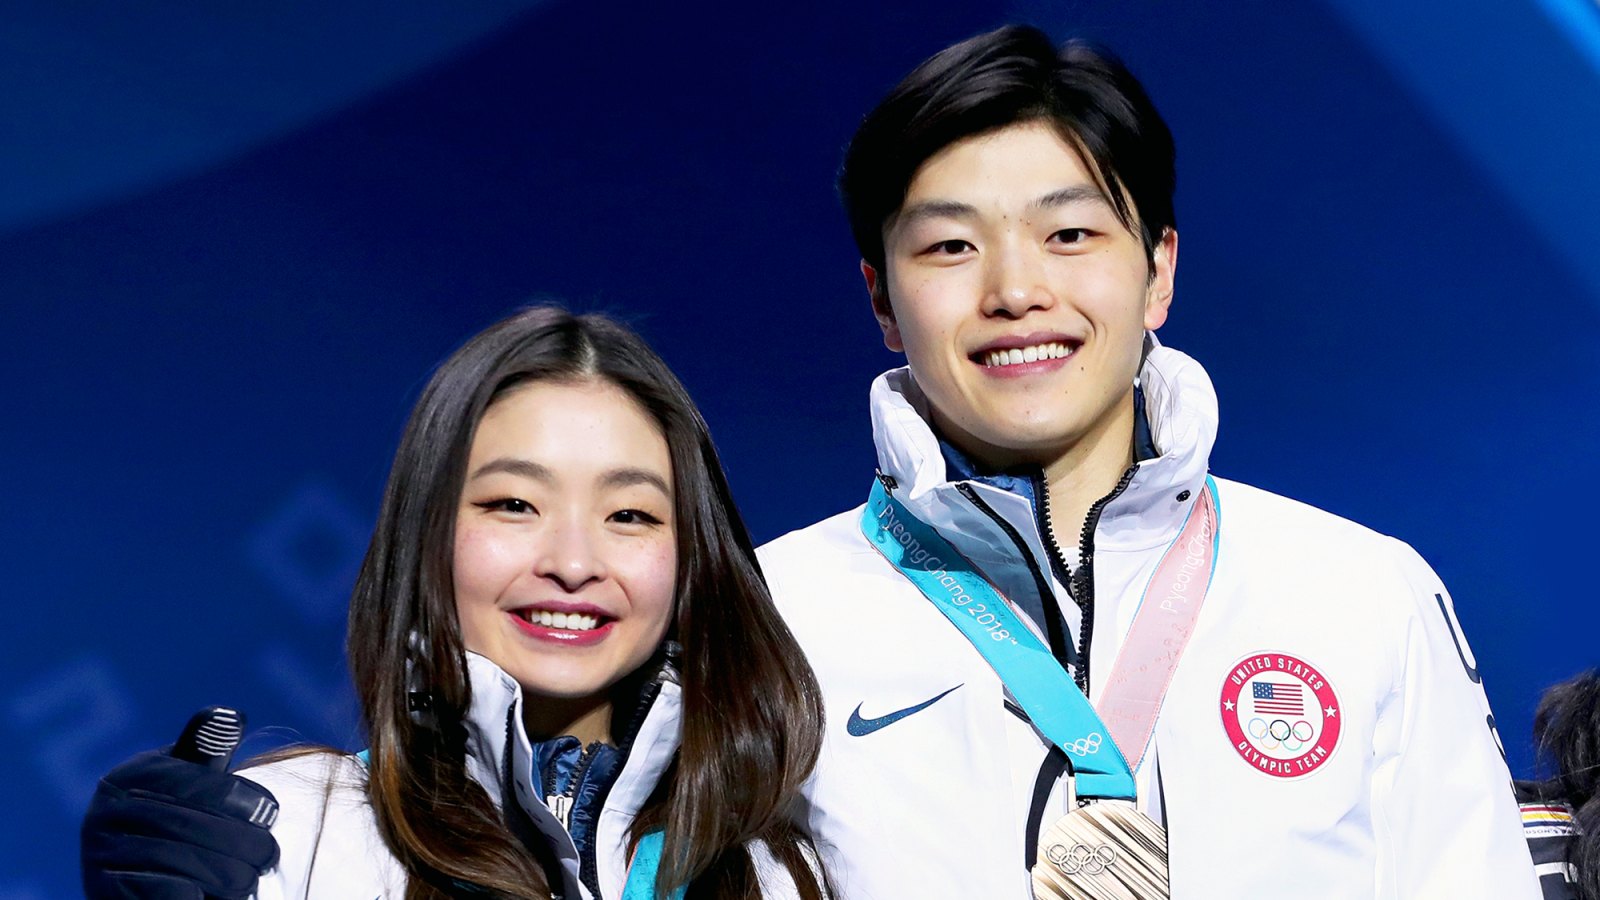 Bronze medalists Maia Shibutani and Alex Shibutani of the United States celebrate during the medal ceremony for Figure Skating - Ice Dance Free Dance on day 11 of the PyeongChang 2018 Winter Olympic Games on February 20, 2018 in Pyeongchang-gun, South Korea.